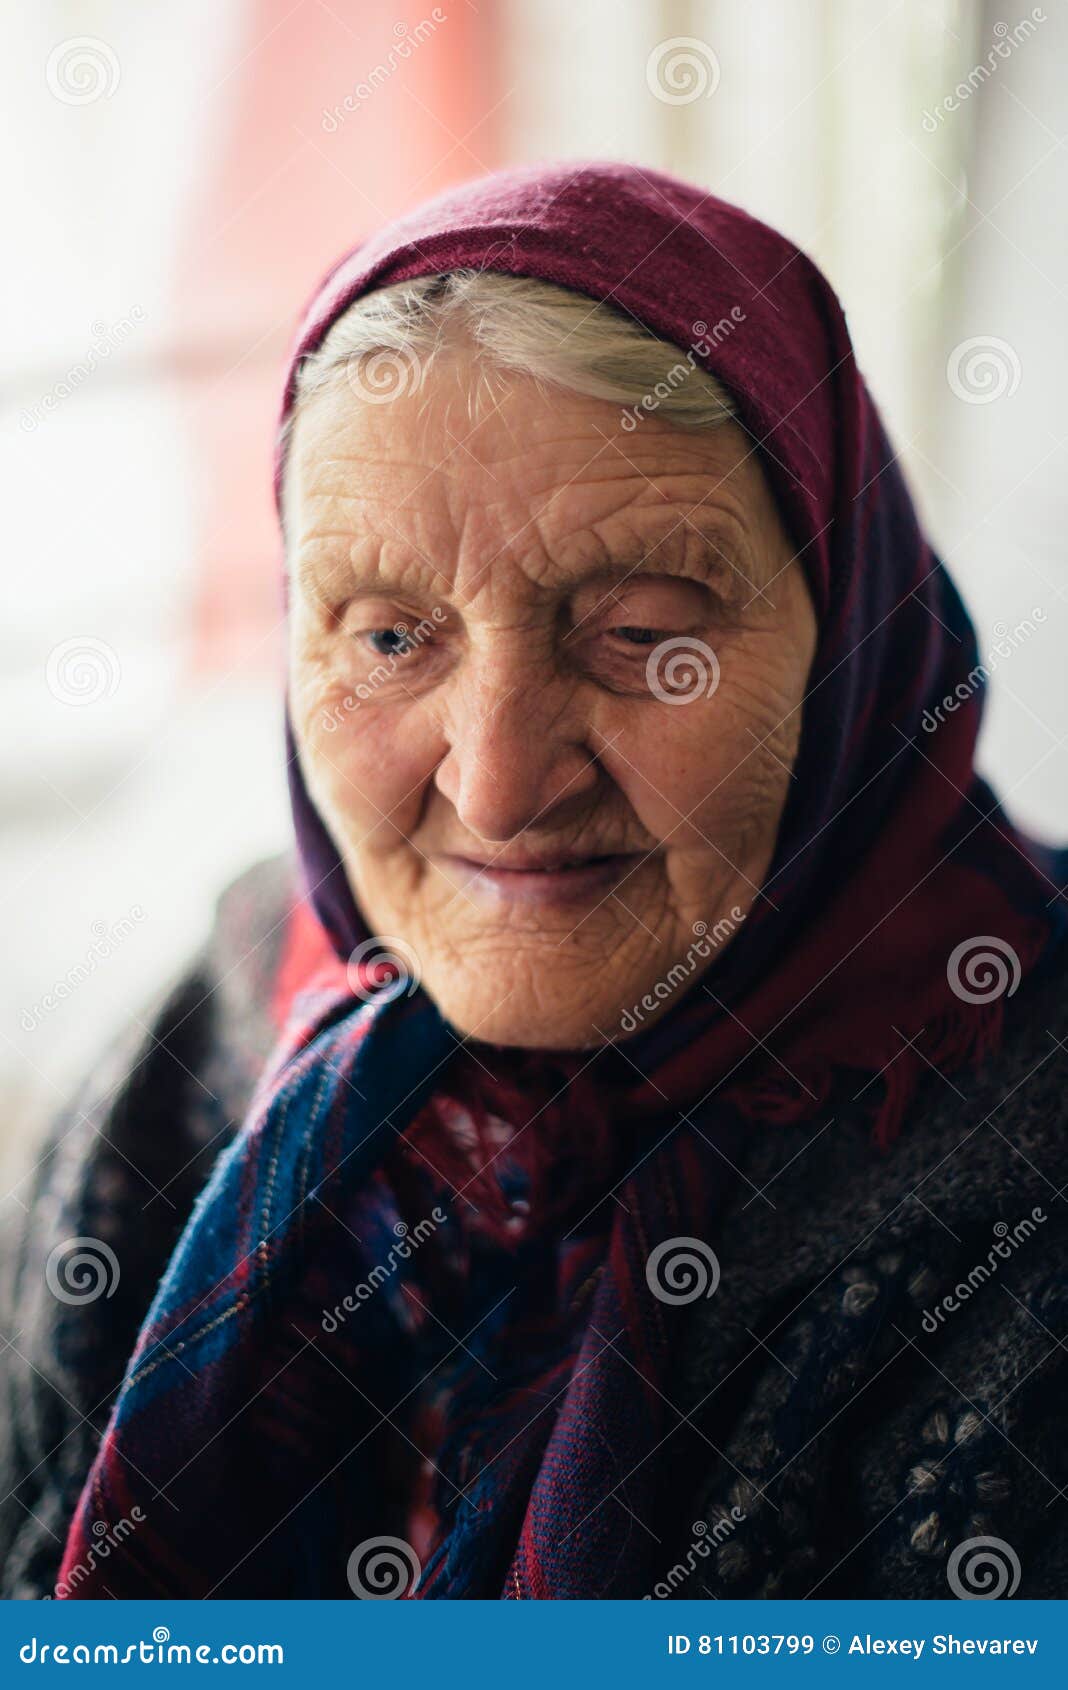 old-grandmother-home-russian-village-81103799.jpg